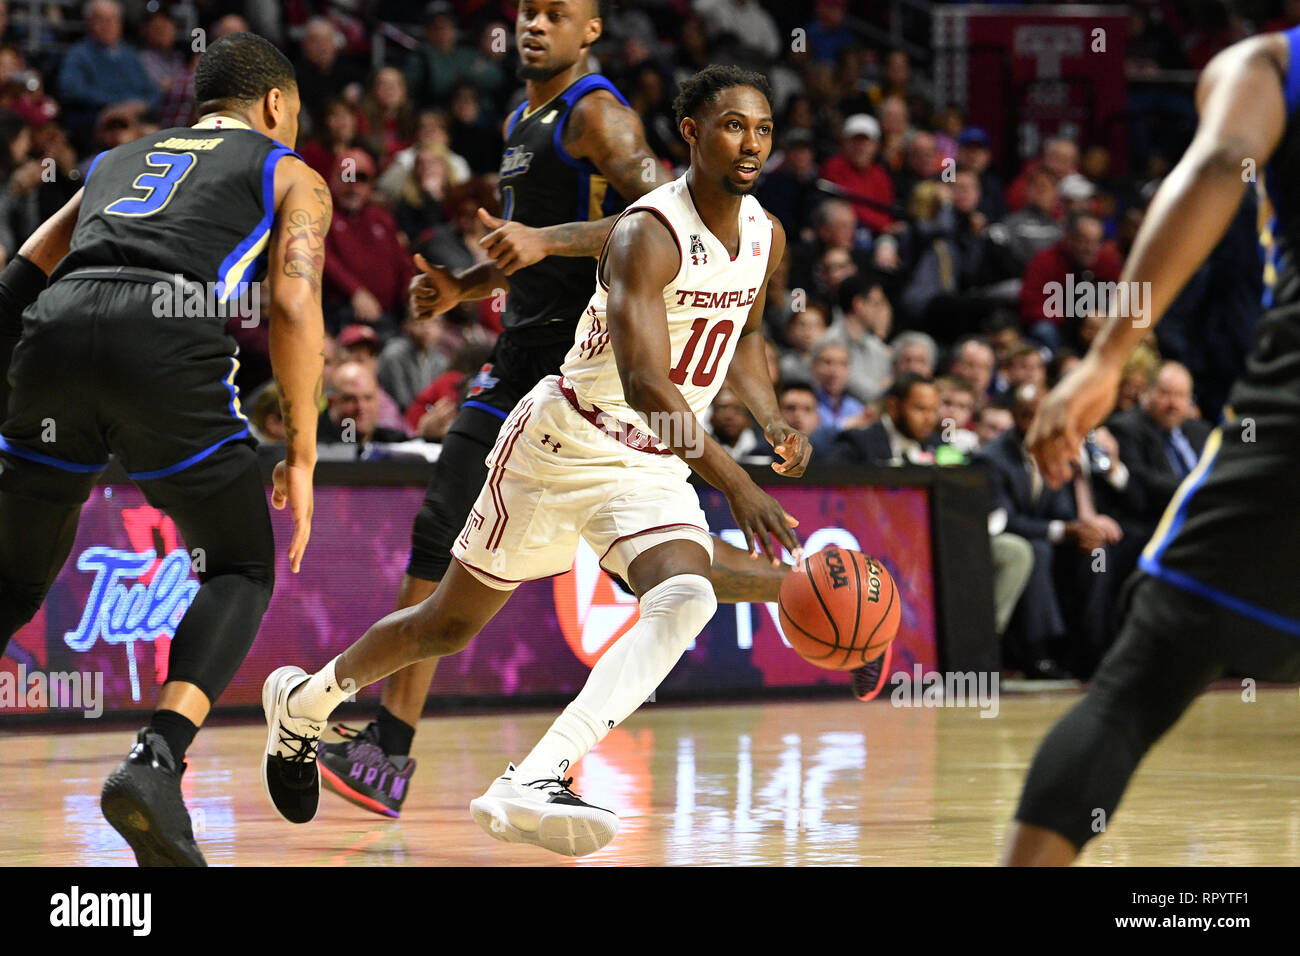 Philadelphia, Pennsylvania, USA. 23rd Feb, 2019. Temple Owls guard SHIZZ ALSTON JR. (10) works through traffic bringing the ball up during the American Athletic Conference basketball game played at the Liacouras Center in Philadelphia. Temple leads Tulsa 31-30. Credit: Ken Inness/ZUMA Wire/Alamy Live News Stock Photo